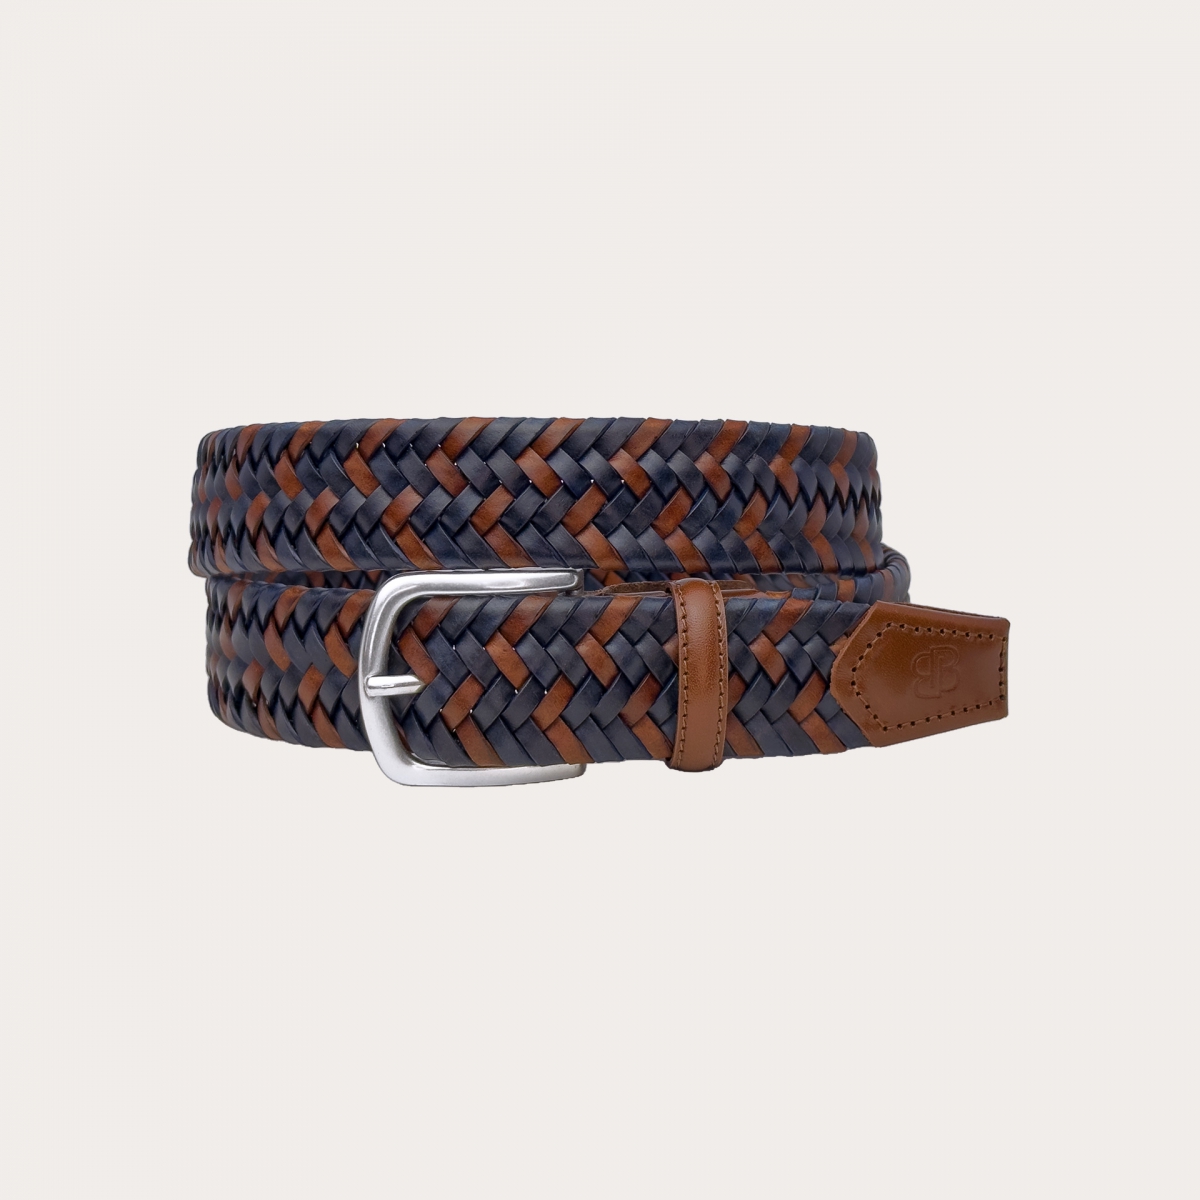 Braided elastic Leather Belt brown and blue